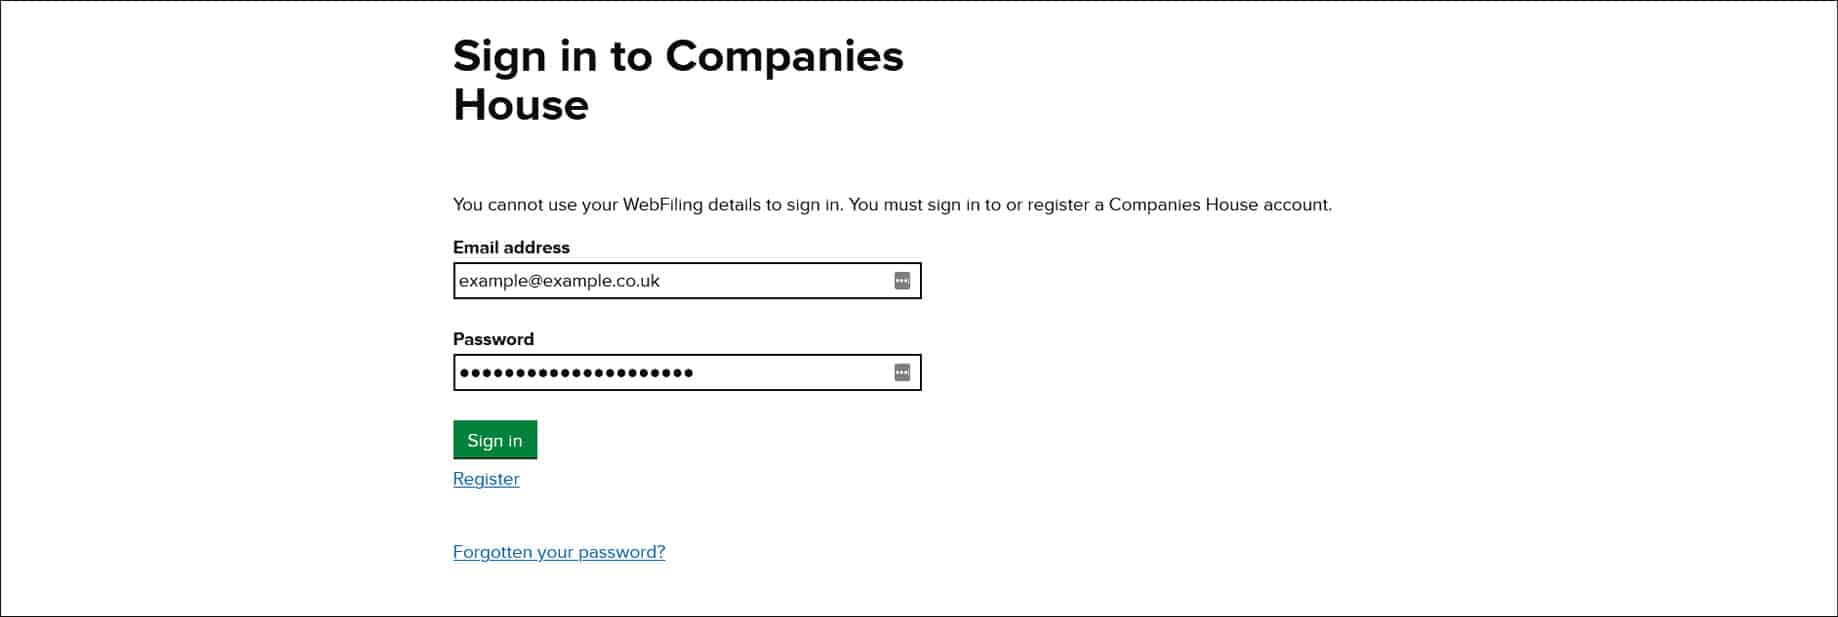 Sign in to Companies House